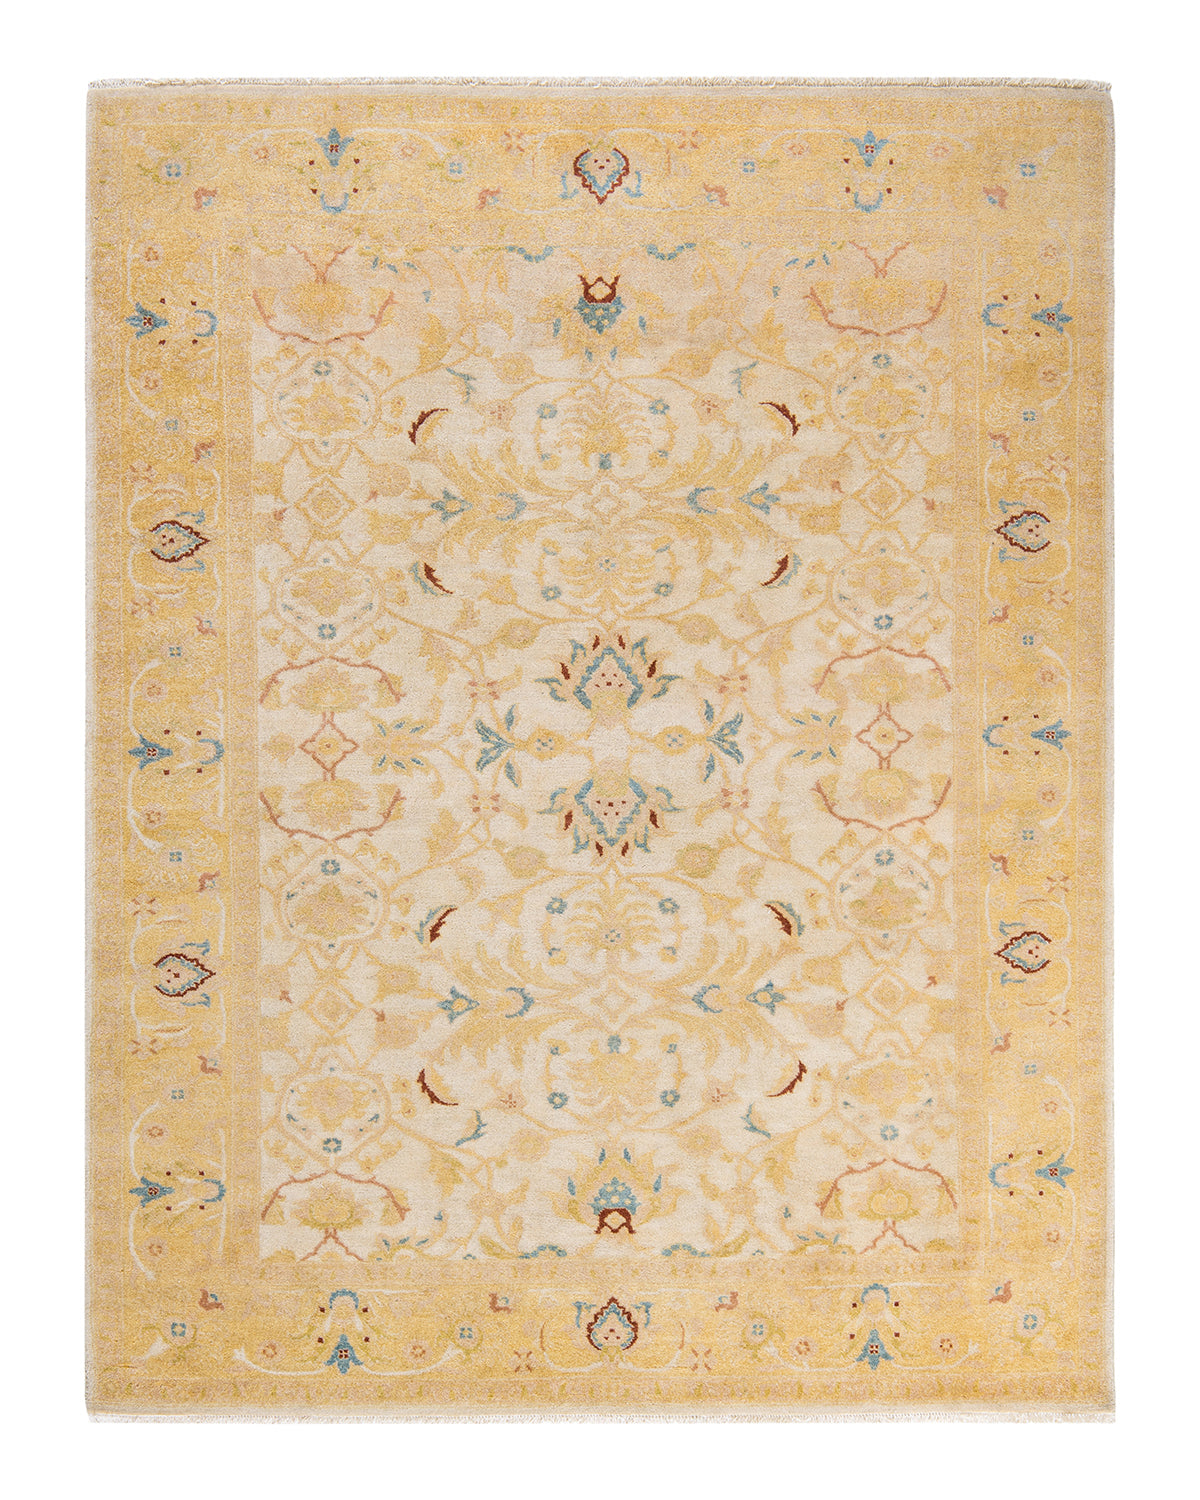 Eclectic, One-of-a-Kind Hand-Knotted Area Rug  - Ivory, 6' 4" x 8' 2"